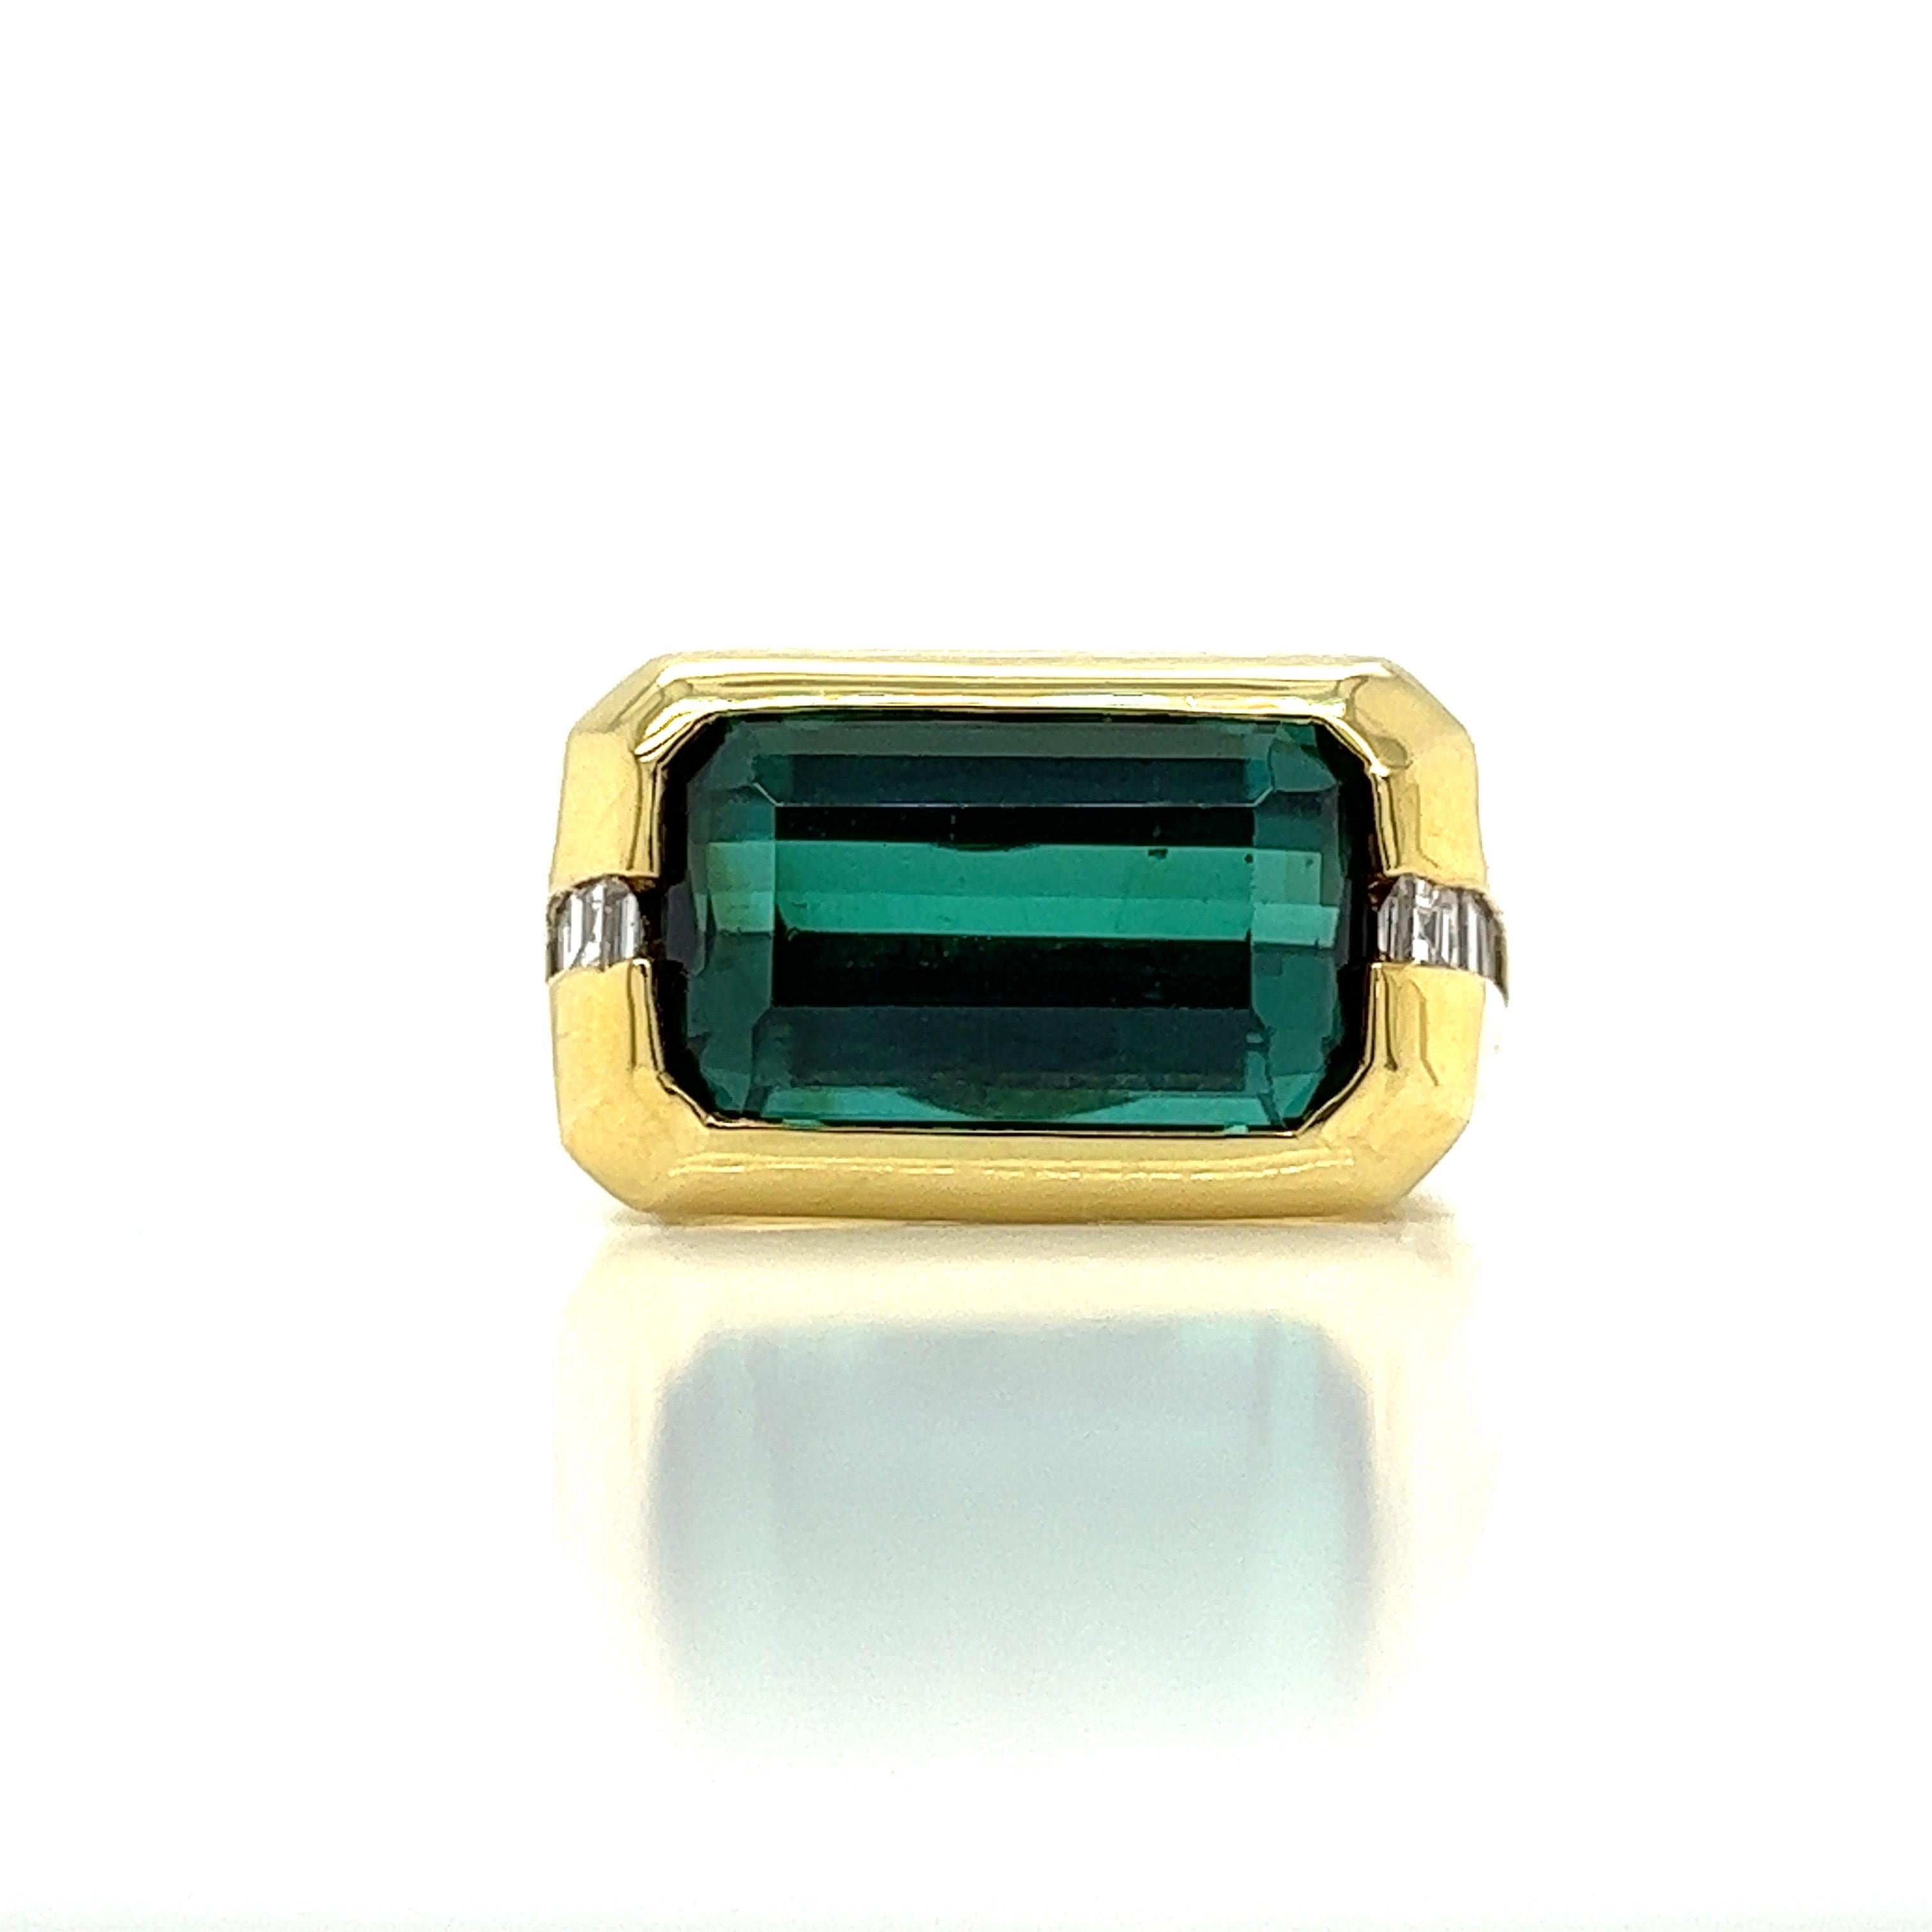 This Vintage 6.97 carat Green Tourmaline and Diamond 18K Gold Ring is the perfect blend of traditional and modern style. It is one of a kind, crafted with 18K gold and emerald cut green tourmaline, set east to west for an estate piece with a